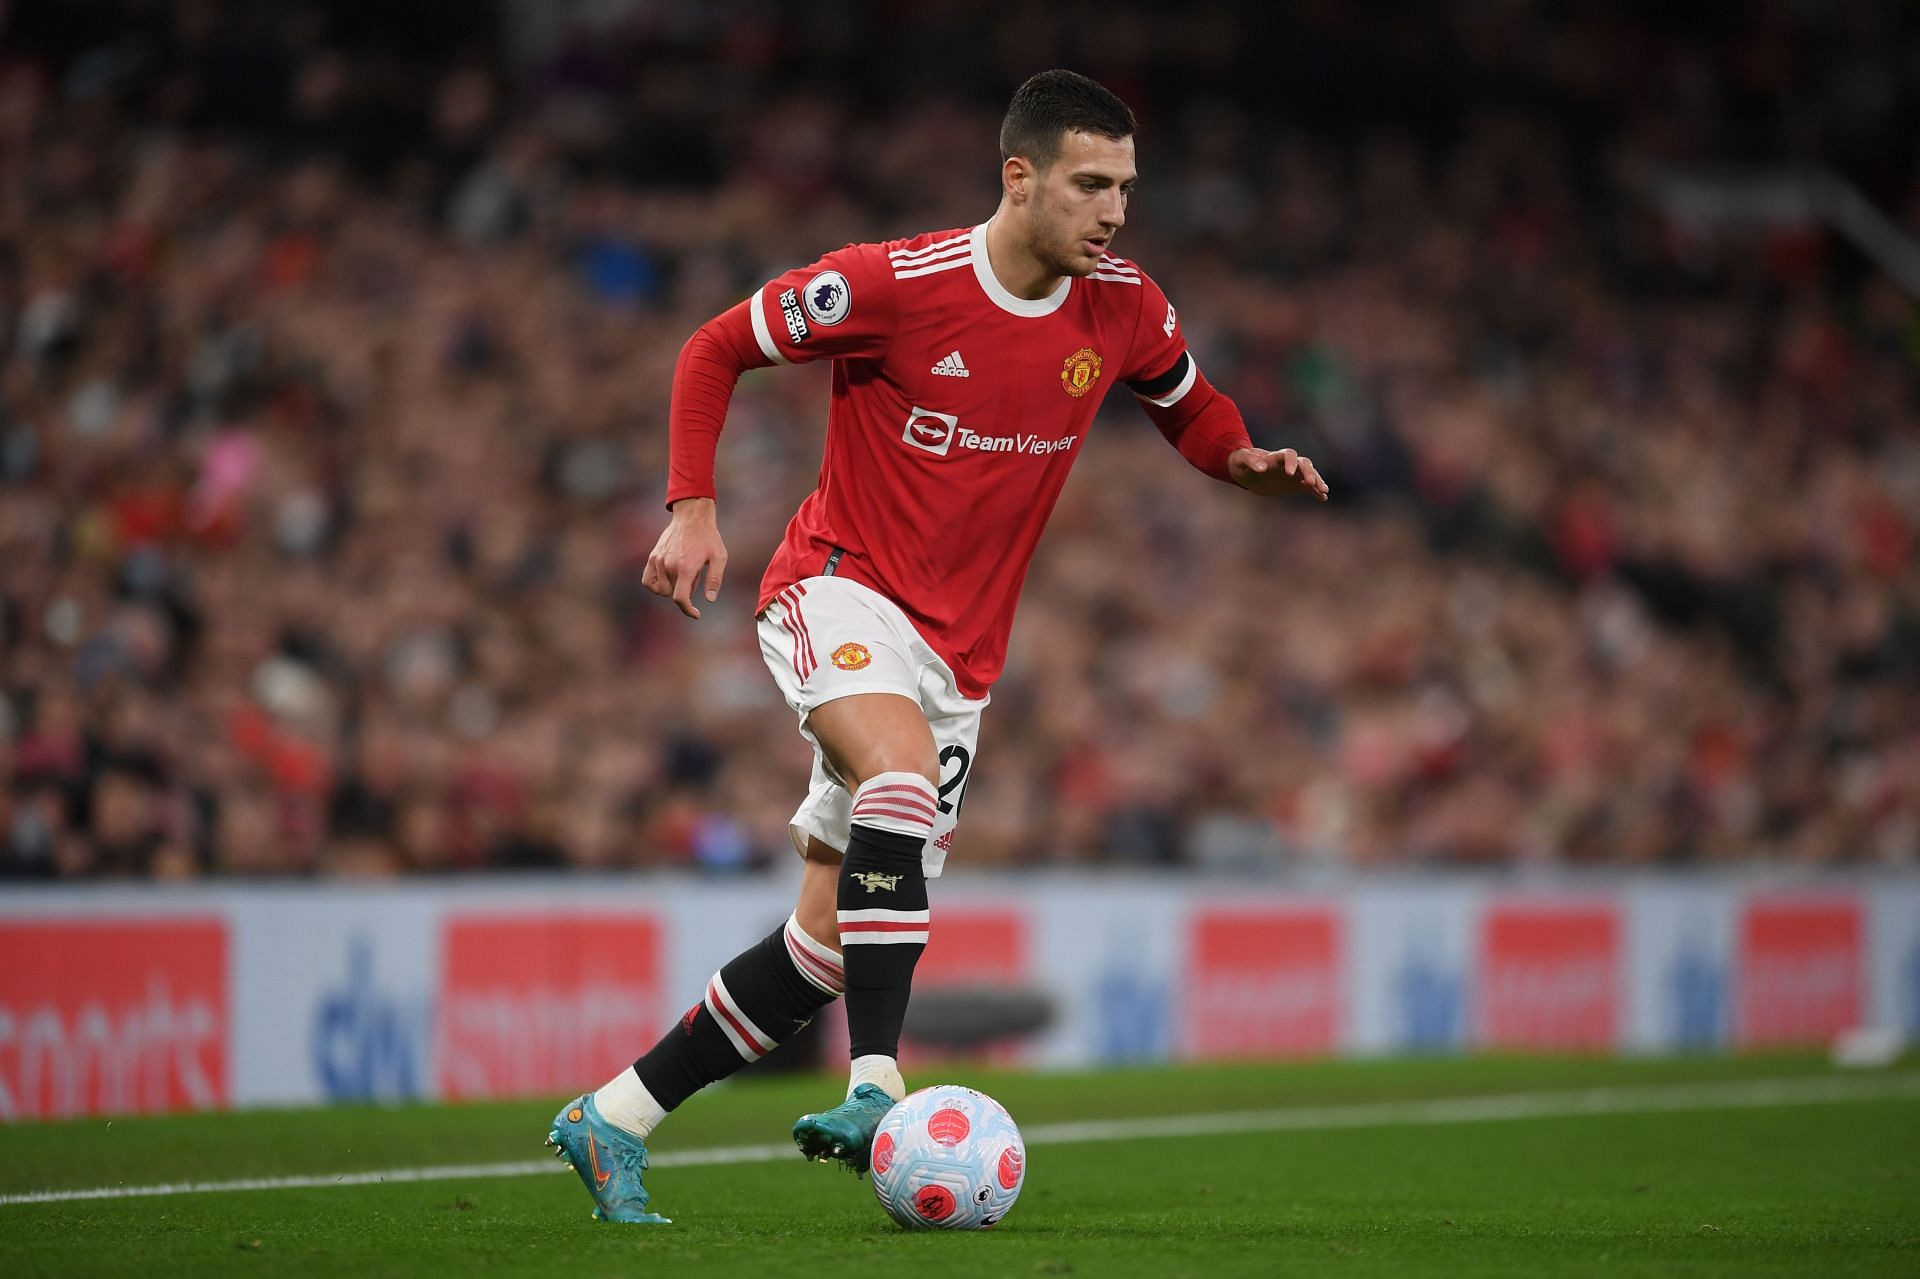 Diogo Dalot drives forward with the ball for United.